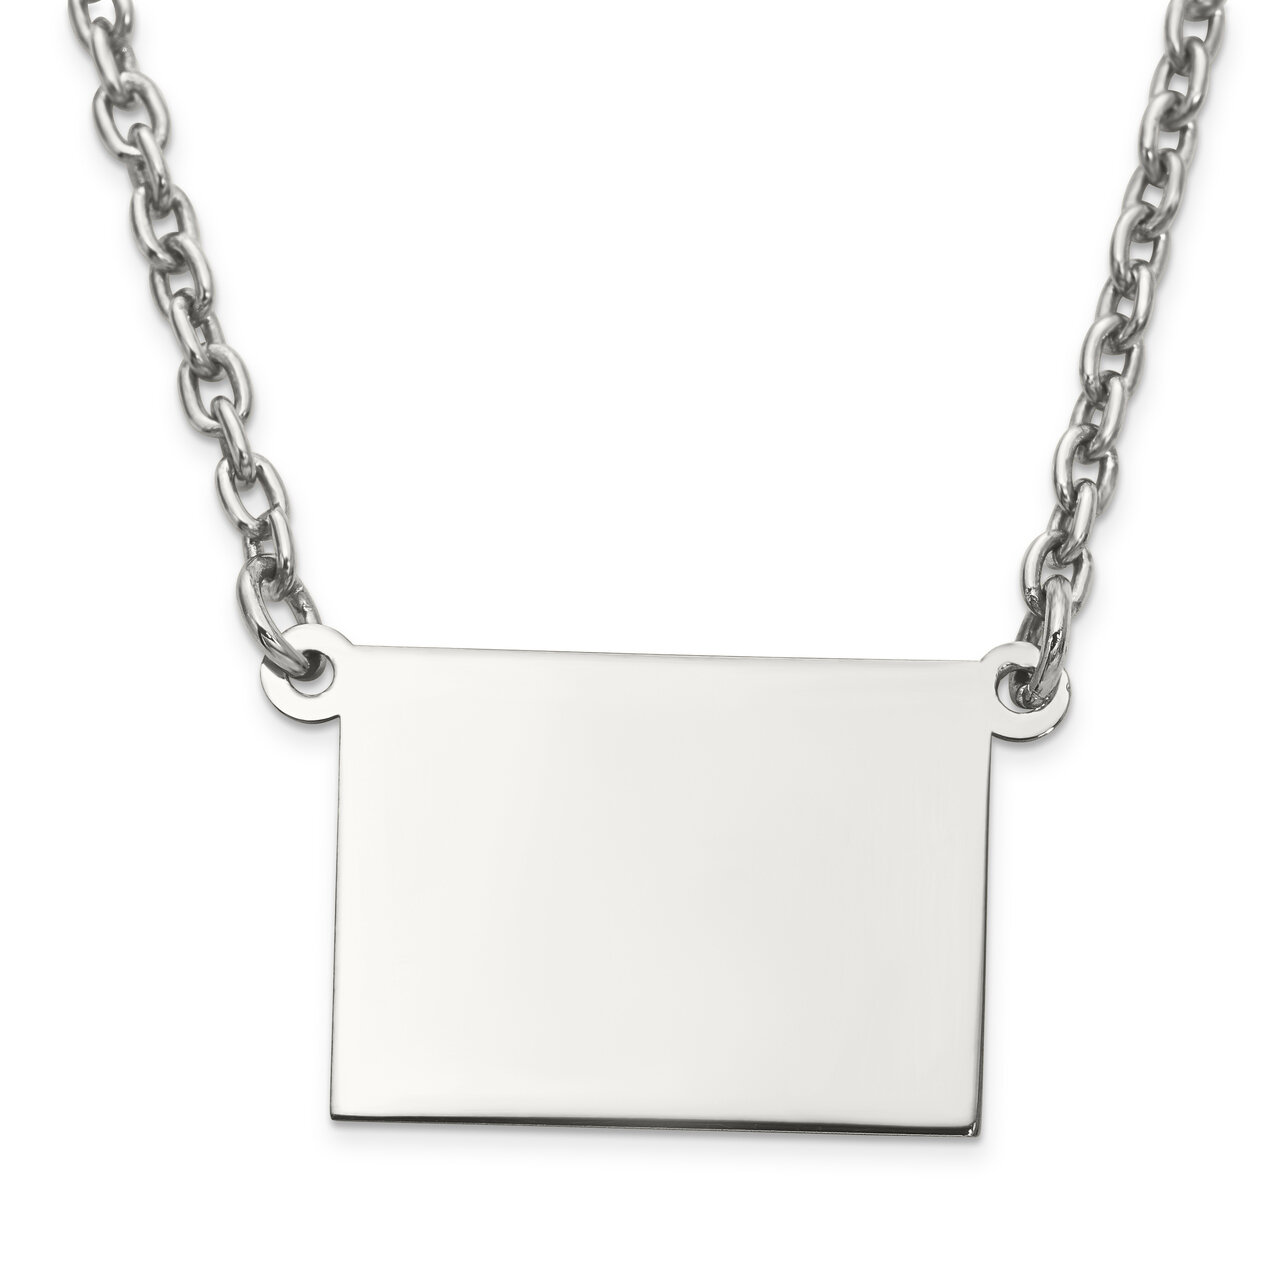 Colorado State Pendant Necklace with Chain Sterling Silver Engravable XNA706SS-CO